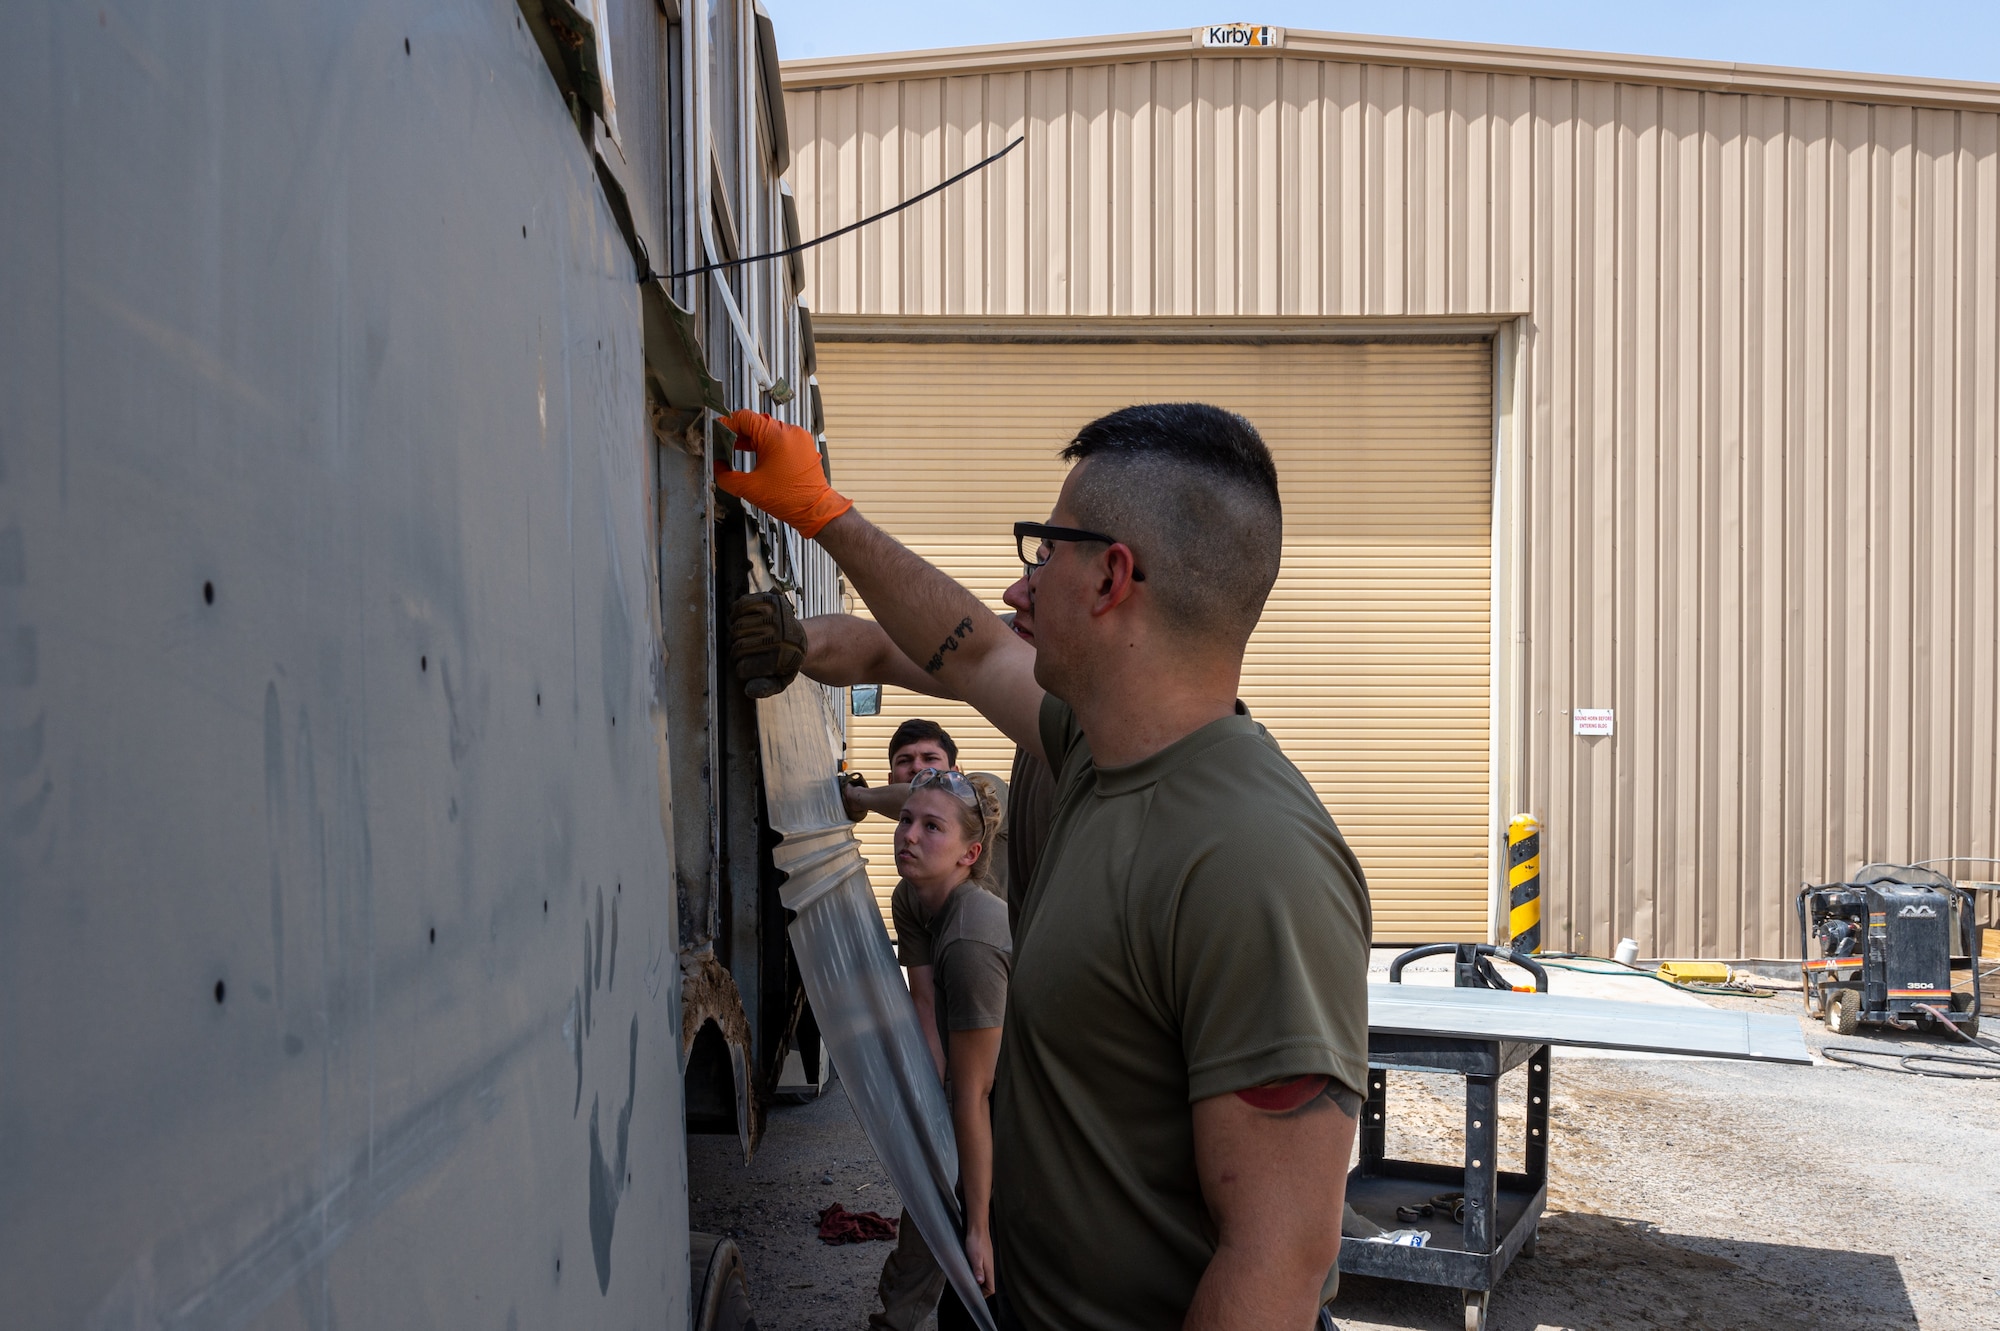 The 386th Expeditionary Logistics Readiness Squadron's vehicle maintenance section provides customer service, fleet management analysis and materiel control that contributes to the mission as they each manage different phases of the assets’ lifecycle at Ali Al Salem Air Base.